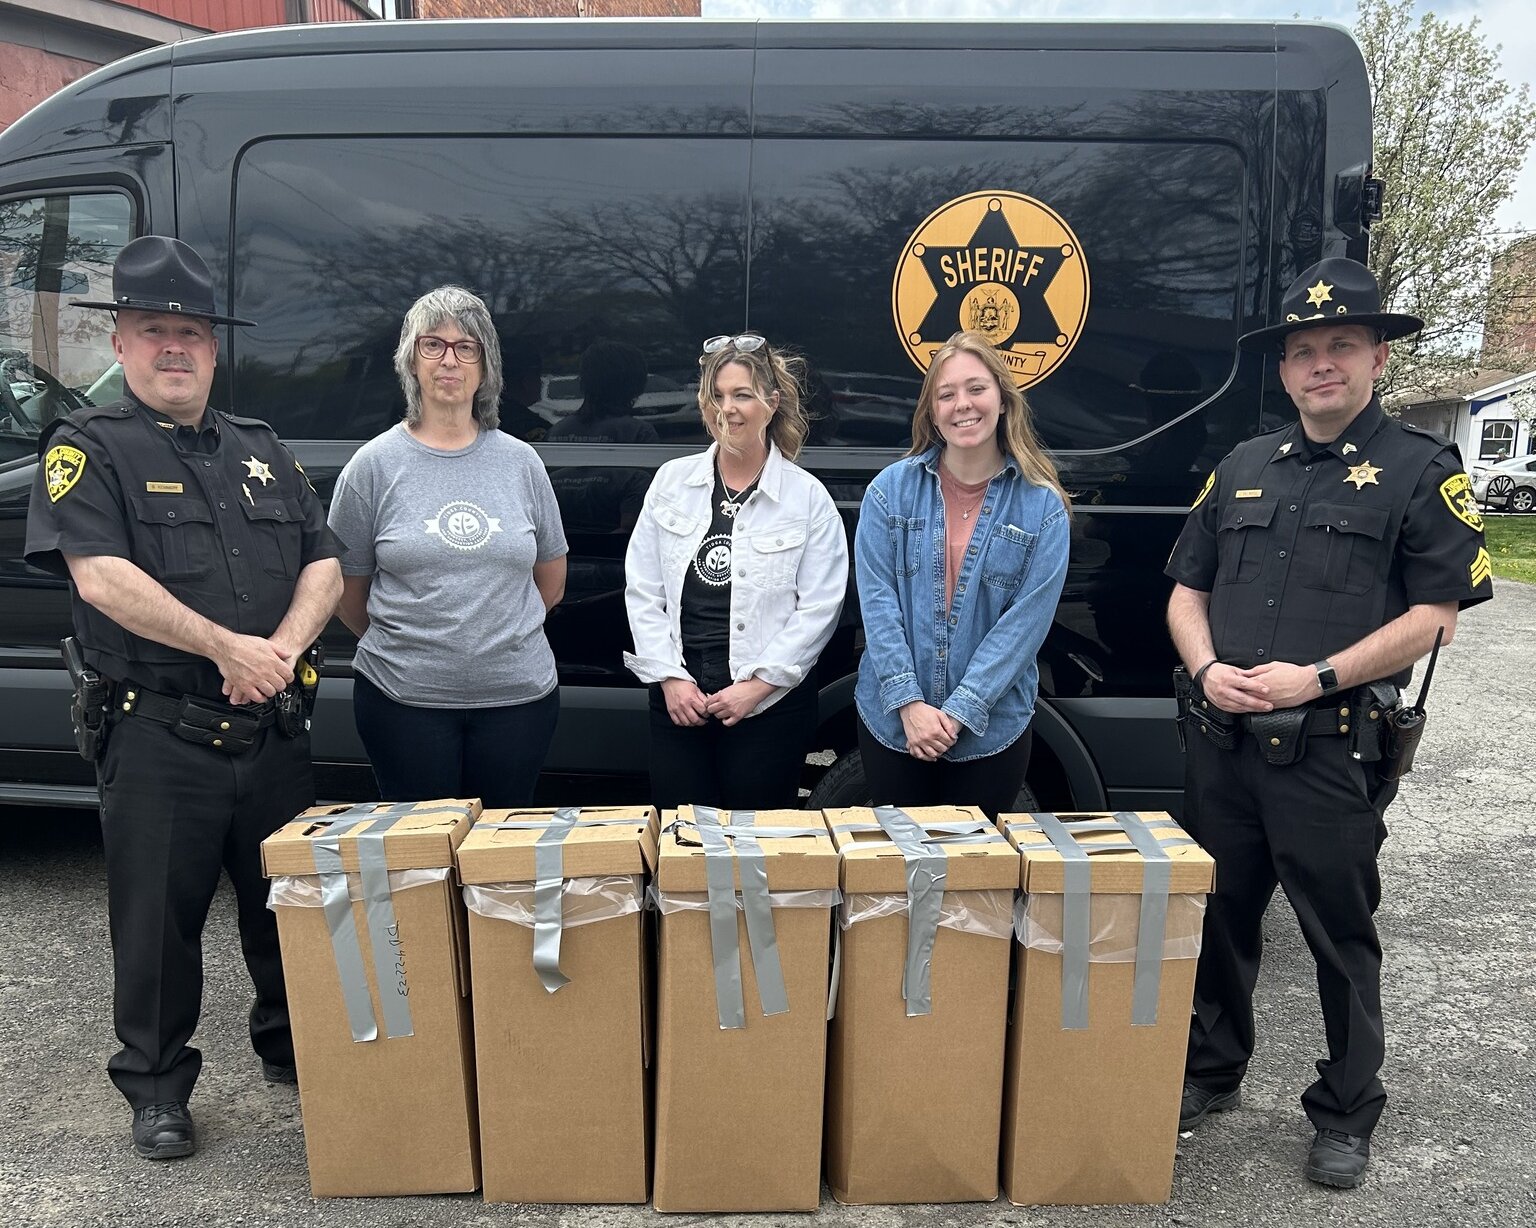 Tioga ASAP members and local police stand with boxes of items received during Drug Take Back Day